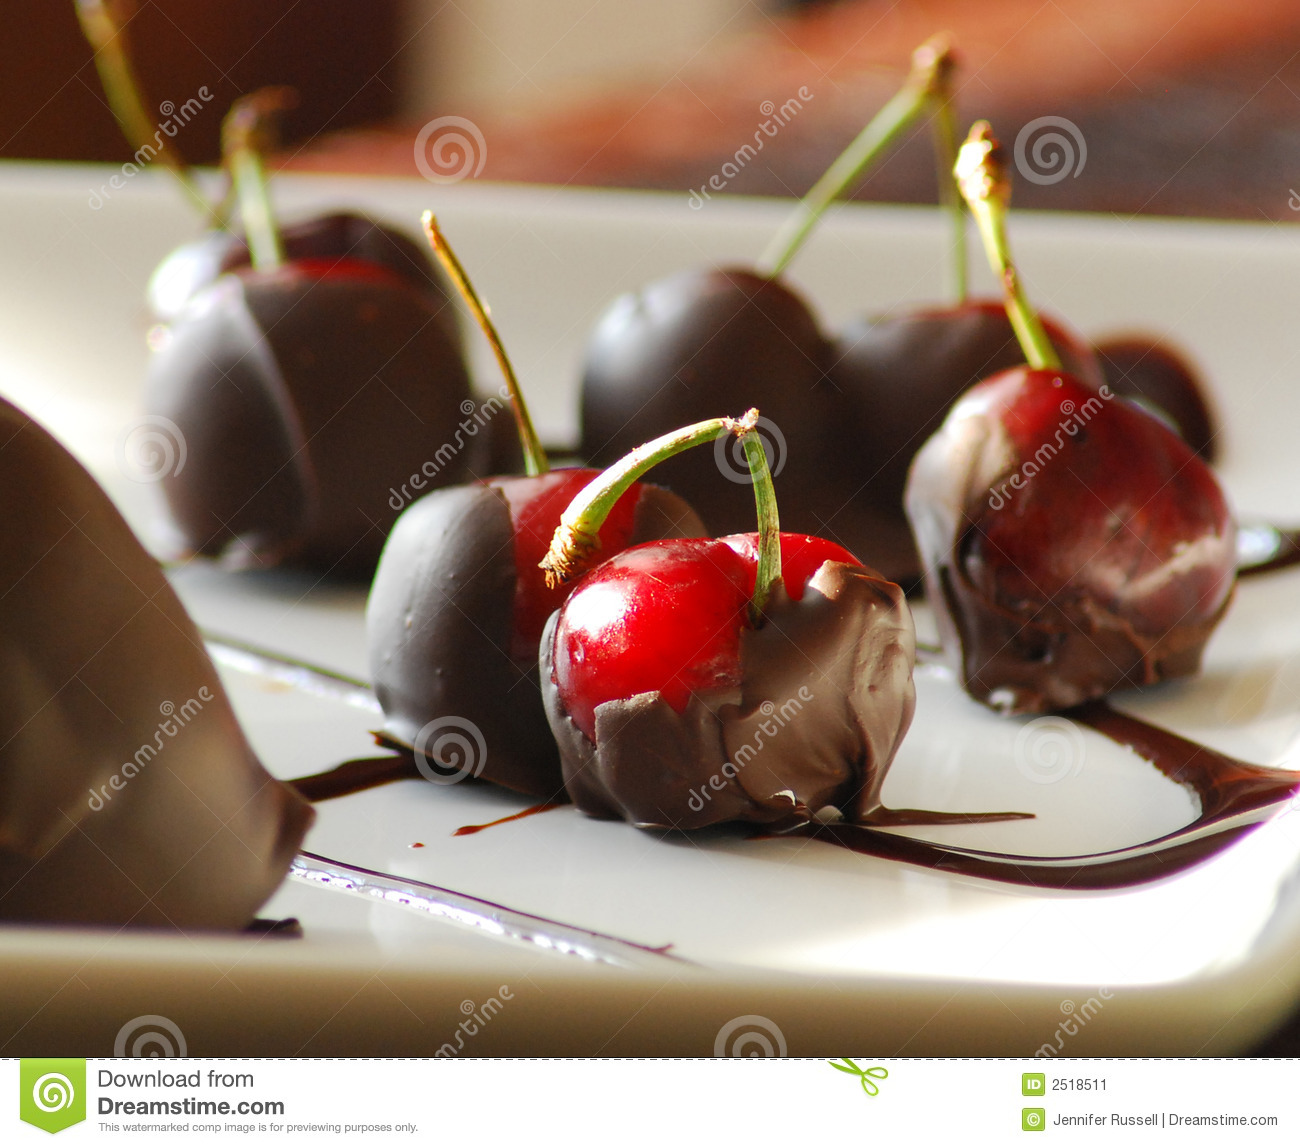 An Artistic Plate Of Chocolate Covered Cherries  The Cherries Have A    